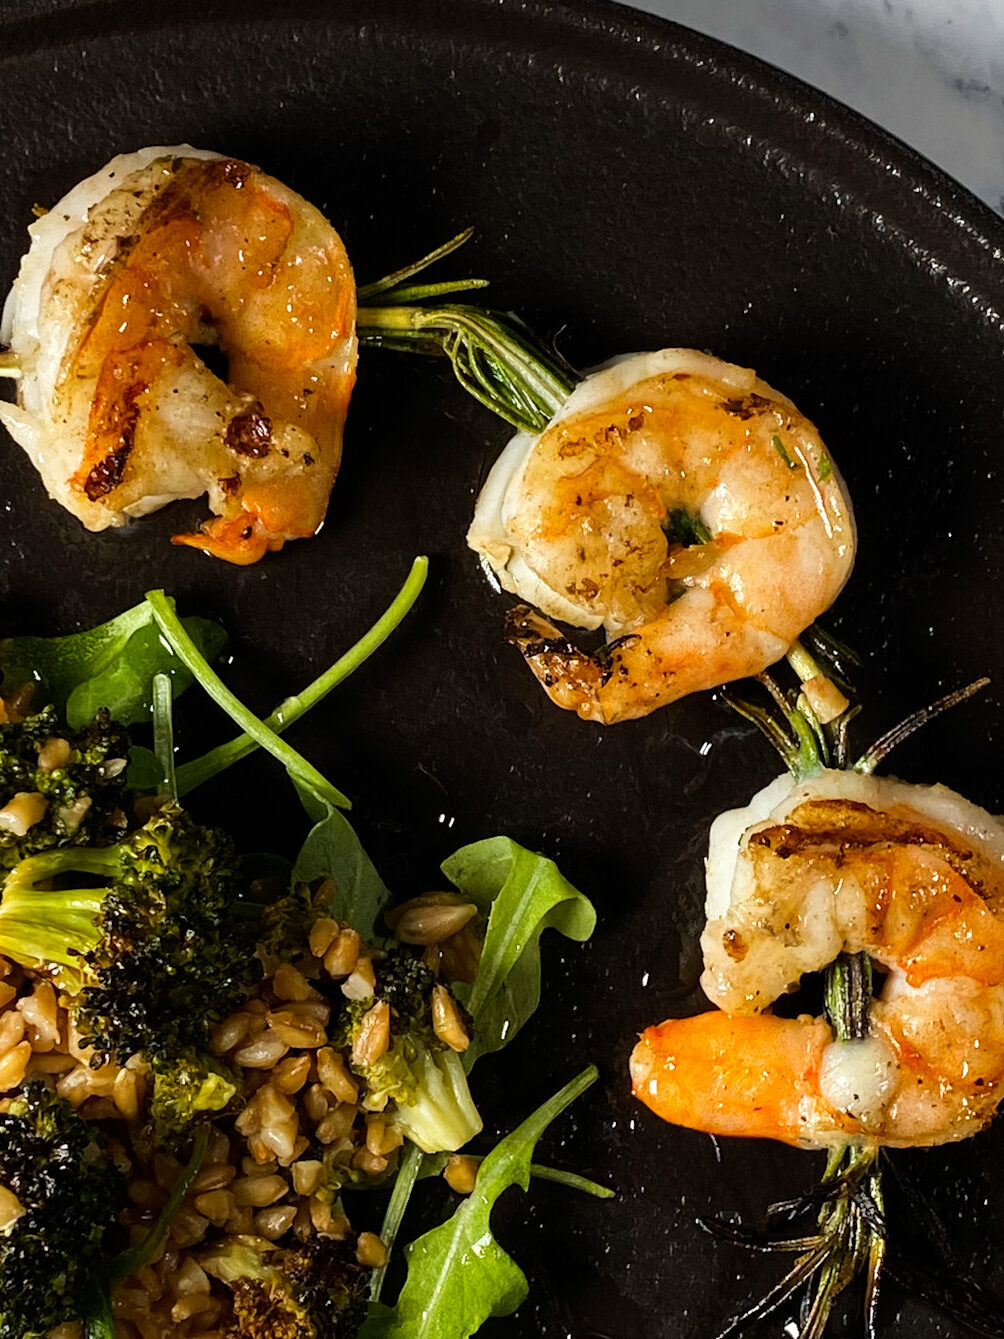 rosemary shrimp skewers with roasted broccoli farro salad on a black plate